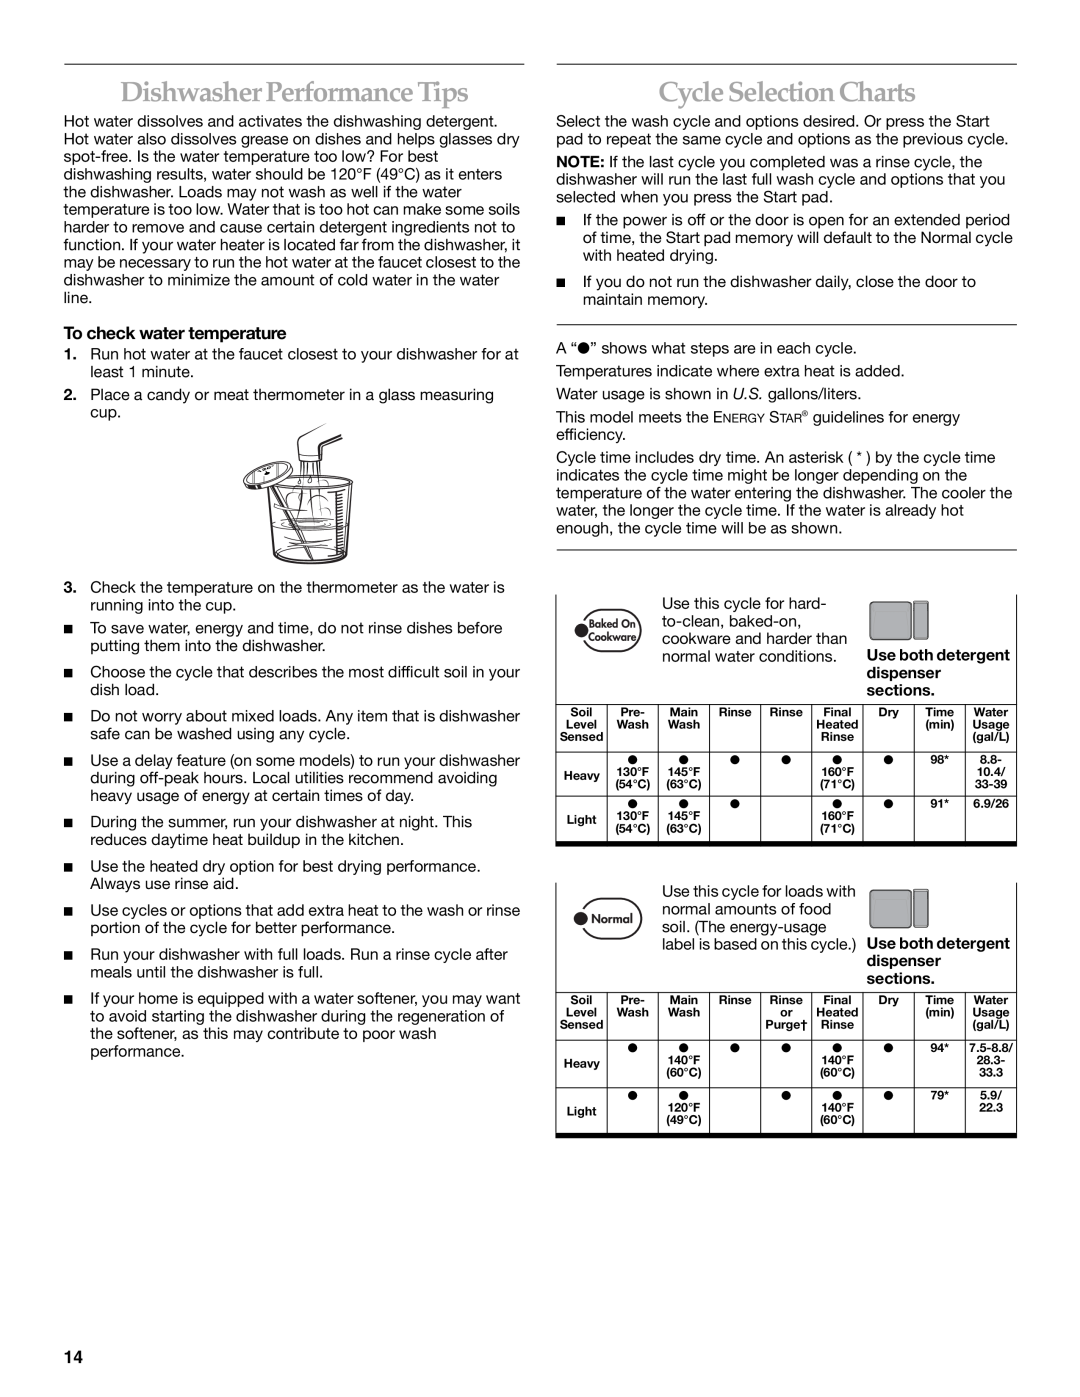 KitchenAid KUDS01DL manual Dishwasher Performance Tips, Cycle Selection Charts, To check water temperature 